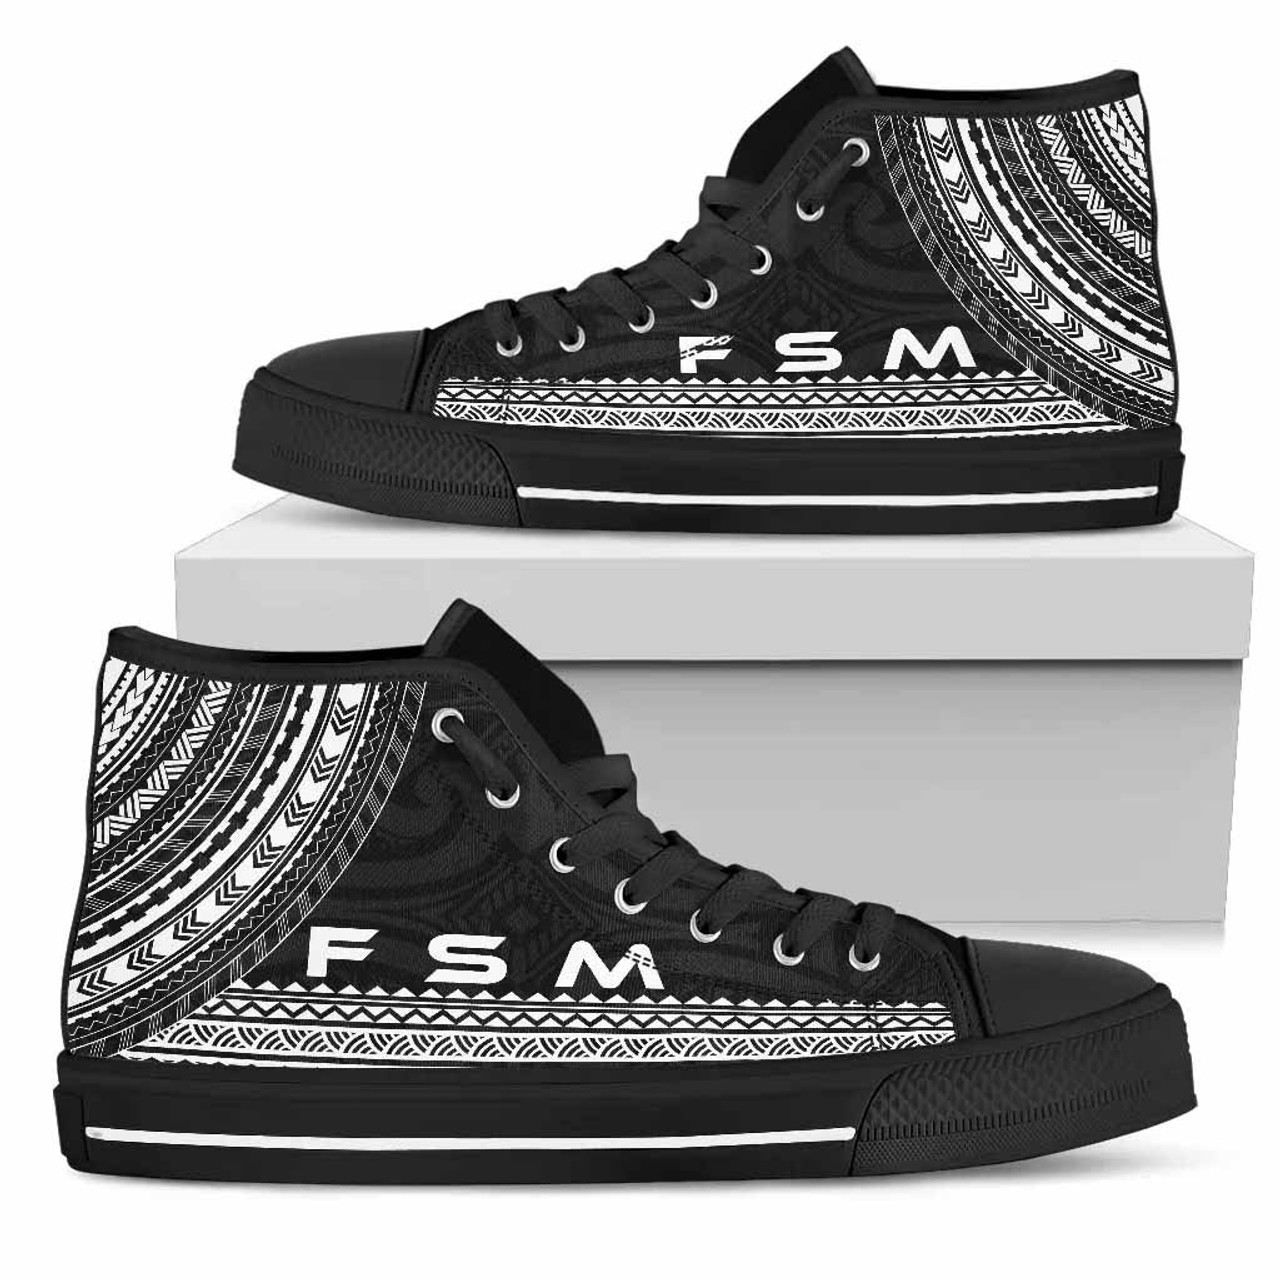 Federated States Of Micronesia High Top Shoes - Polynesian Black Chief Version 2